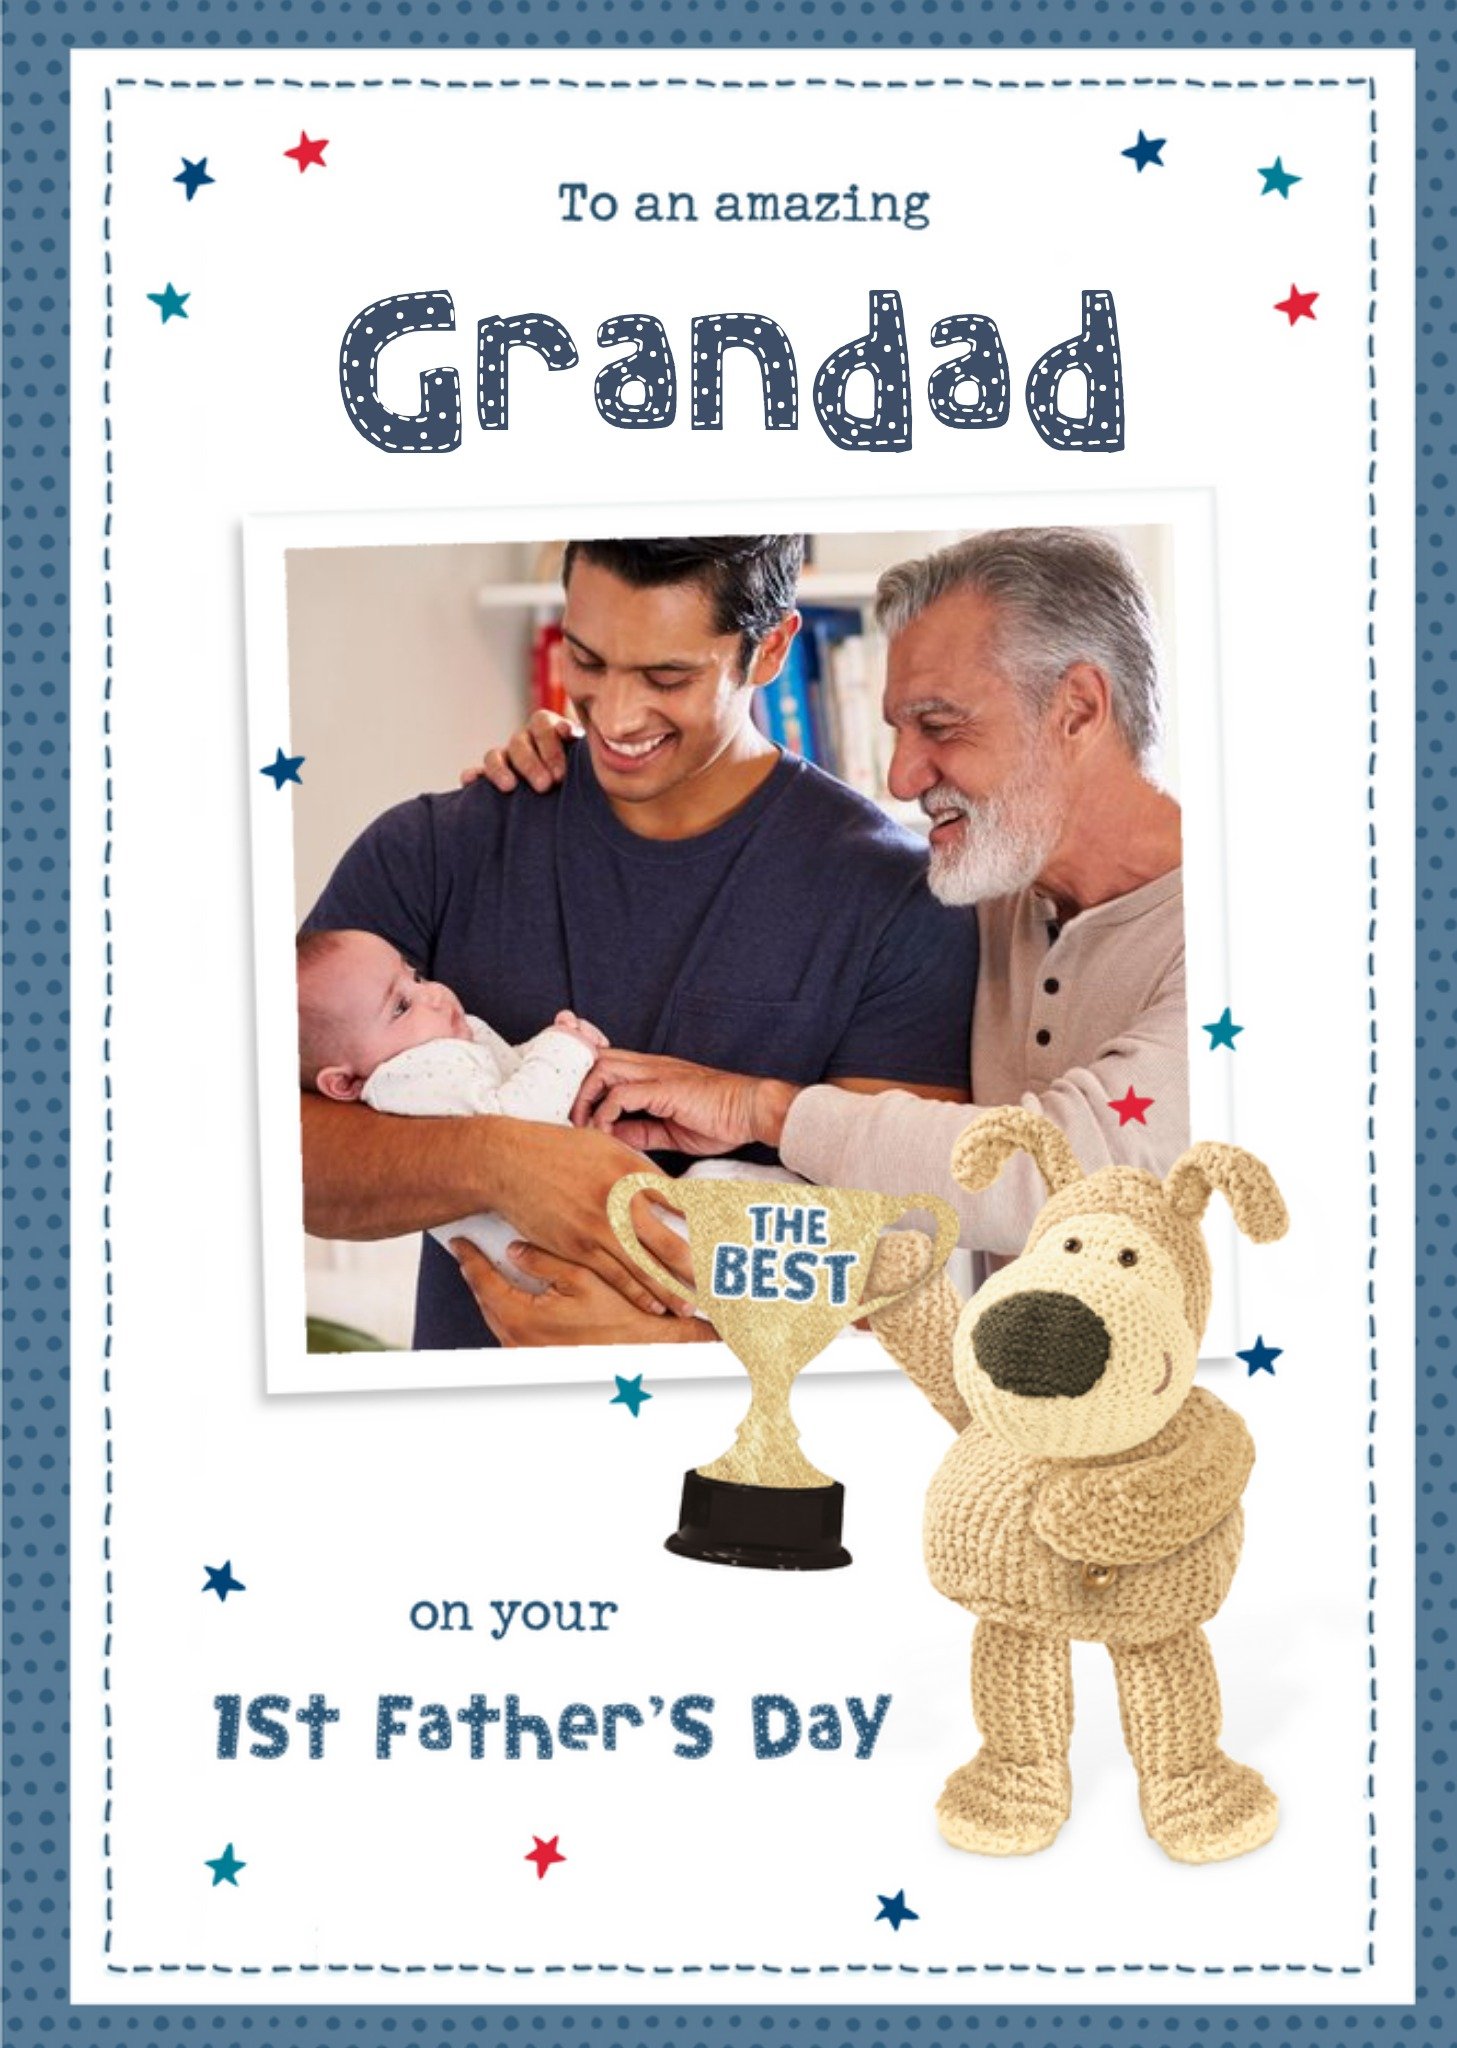 Cute Boofle To My Amazing Grandad Photo Upload First Father's Day Card Ecard